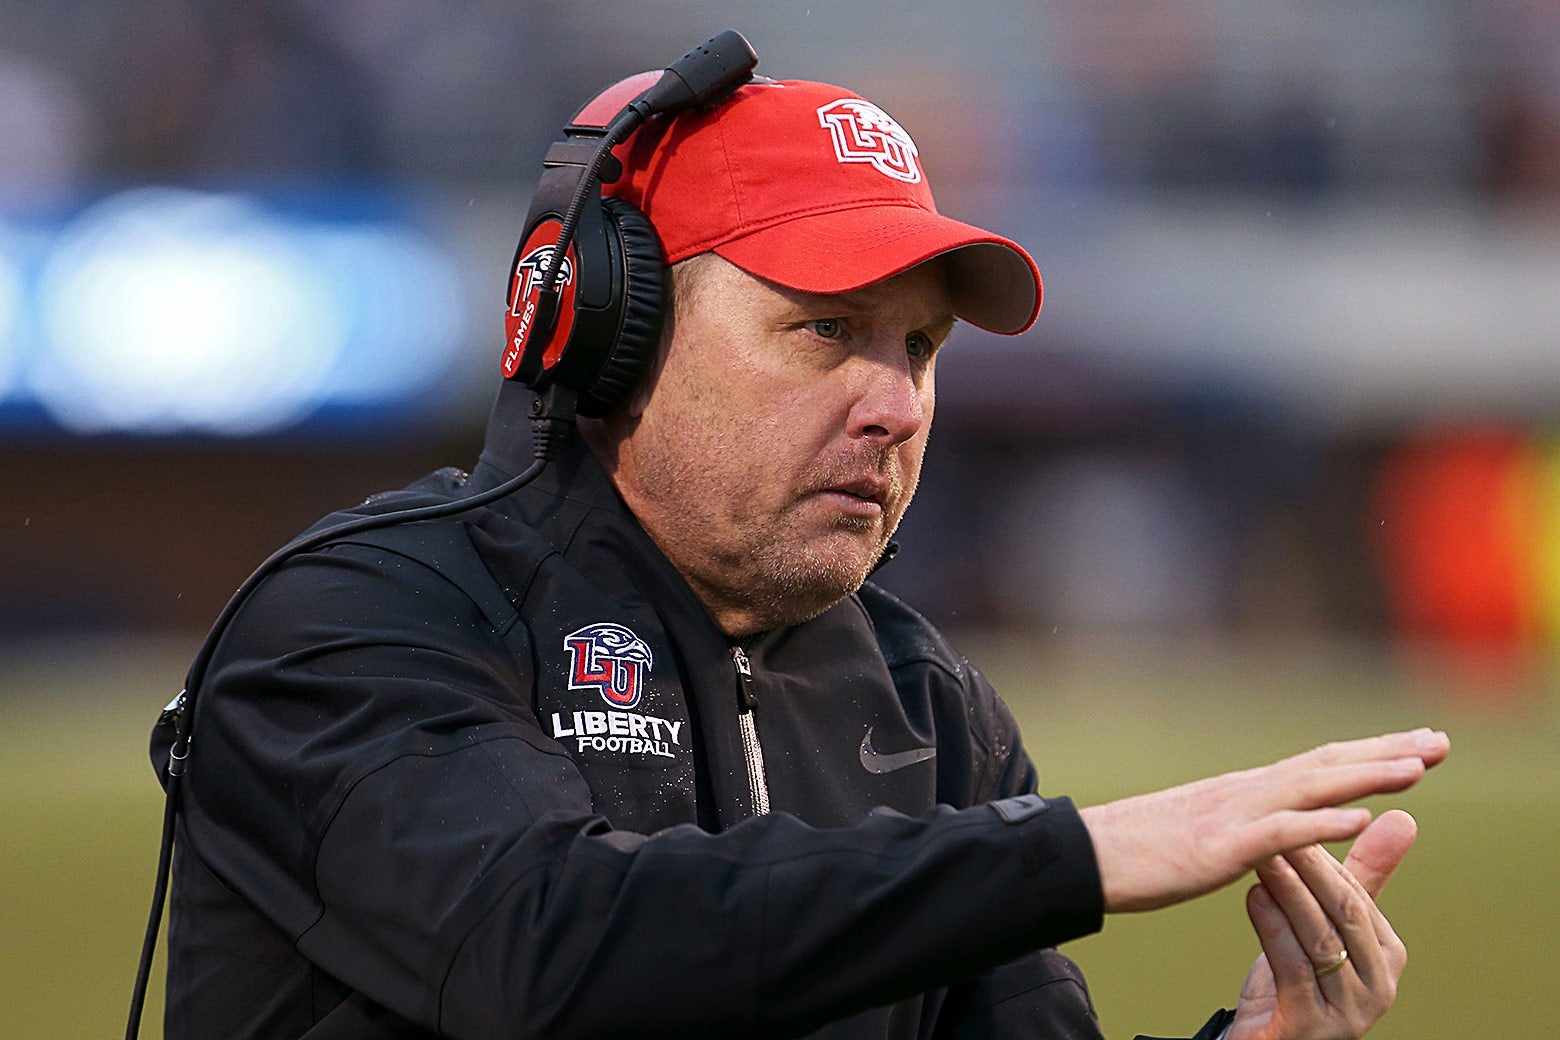 Hugh Freeze on the sidelines in a headset signals a timeout.